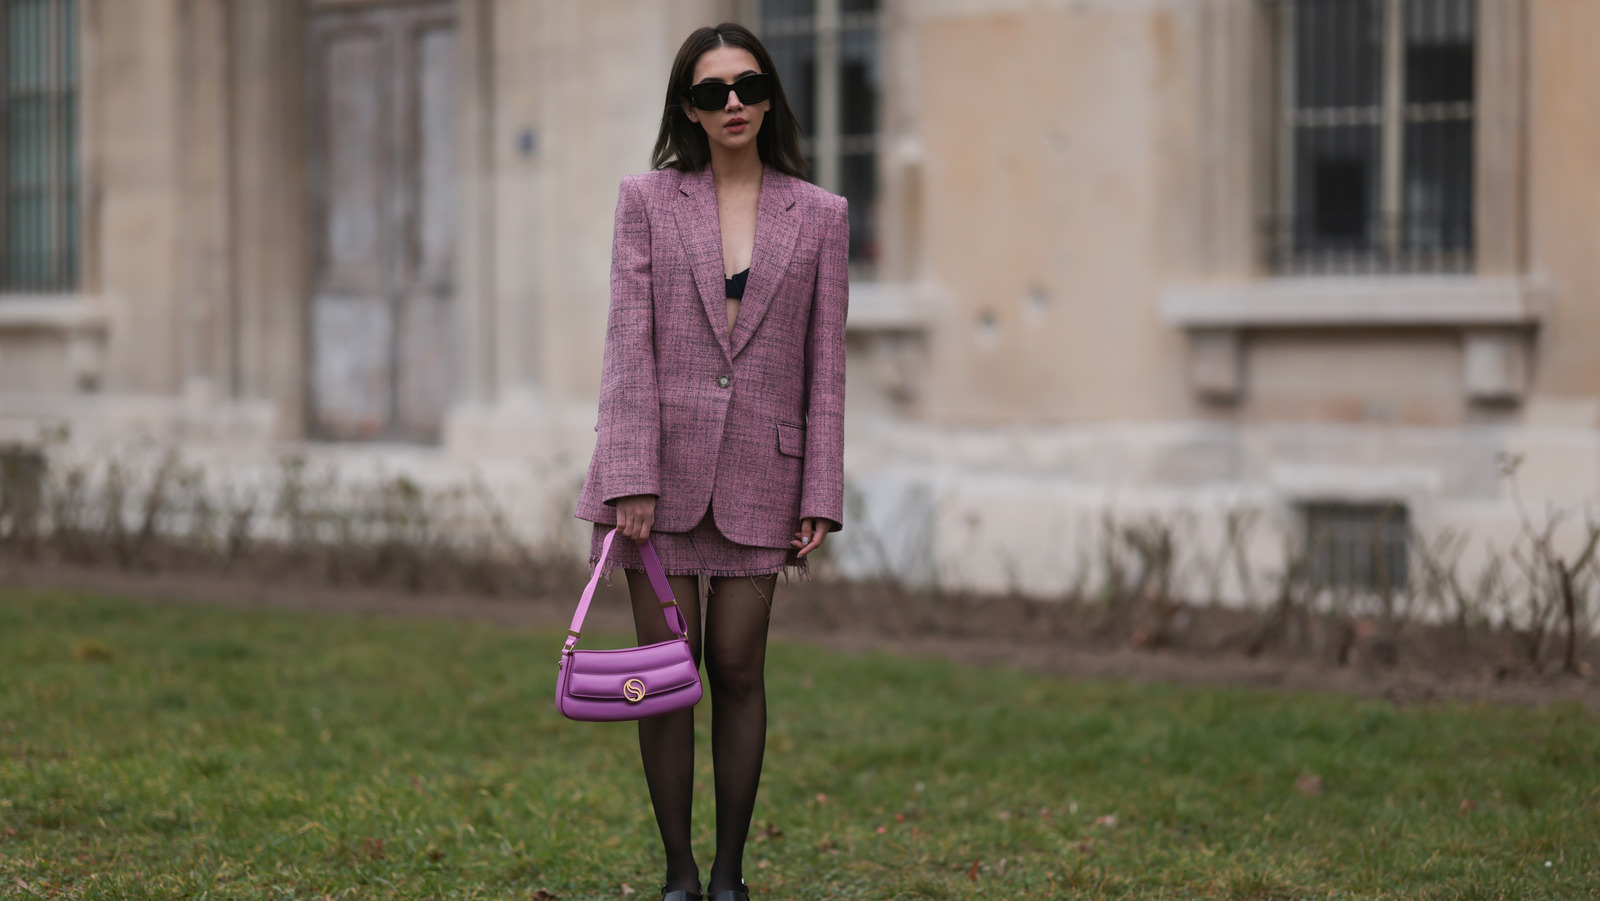 Skirt Suits Aren't Just For College Preps Anymore - Here's How To